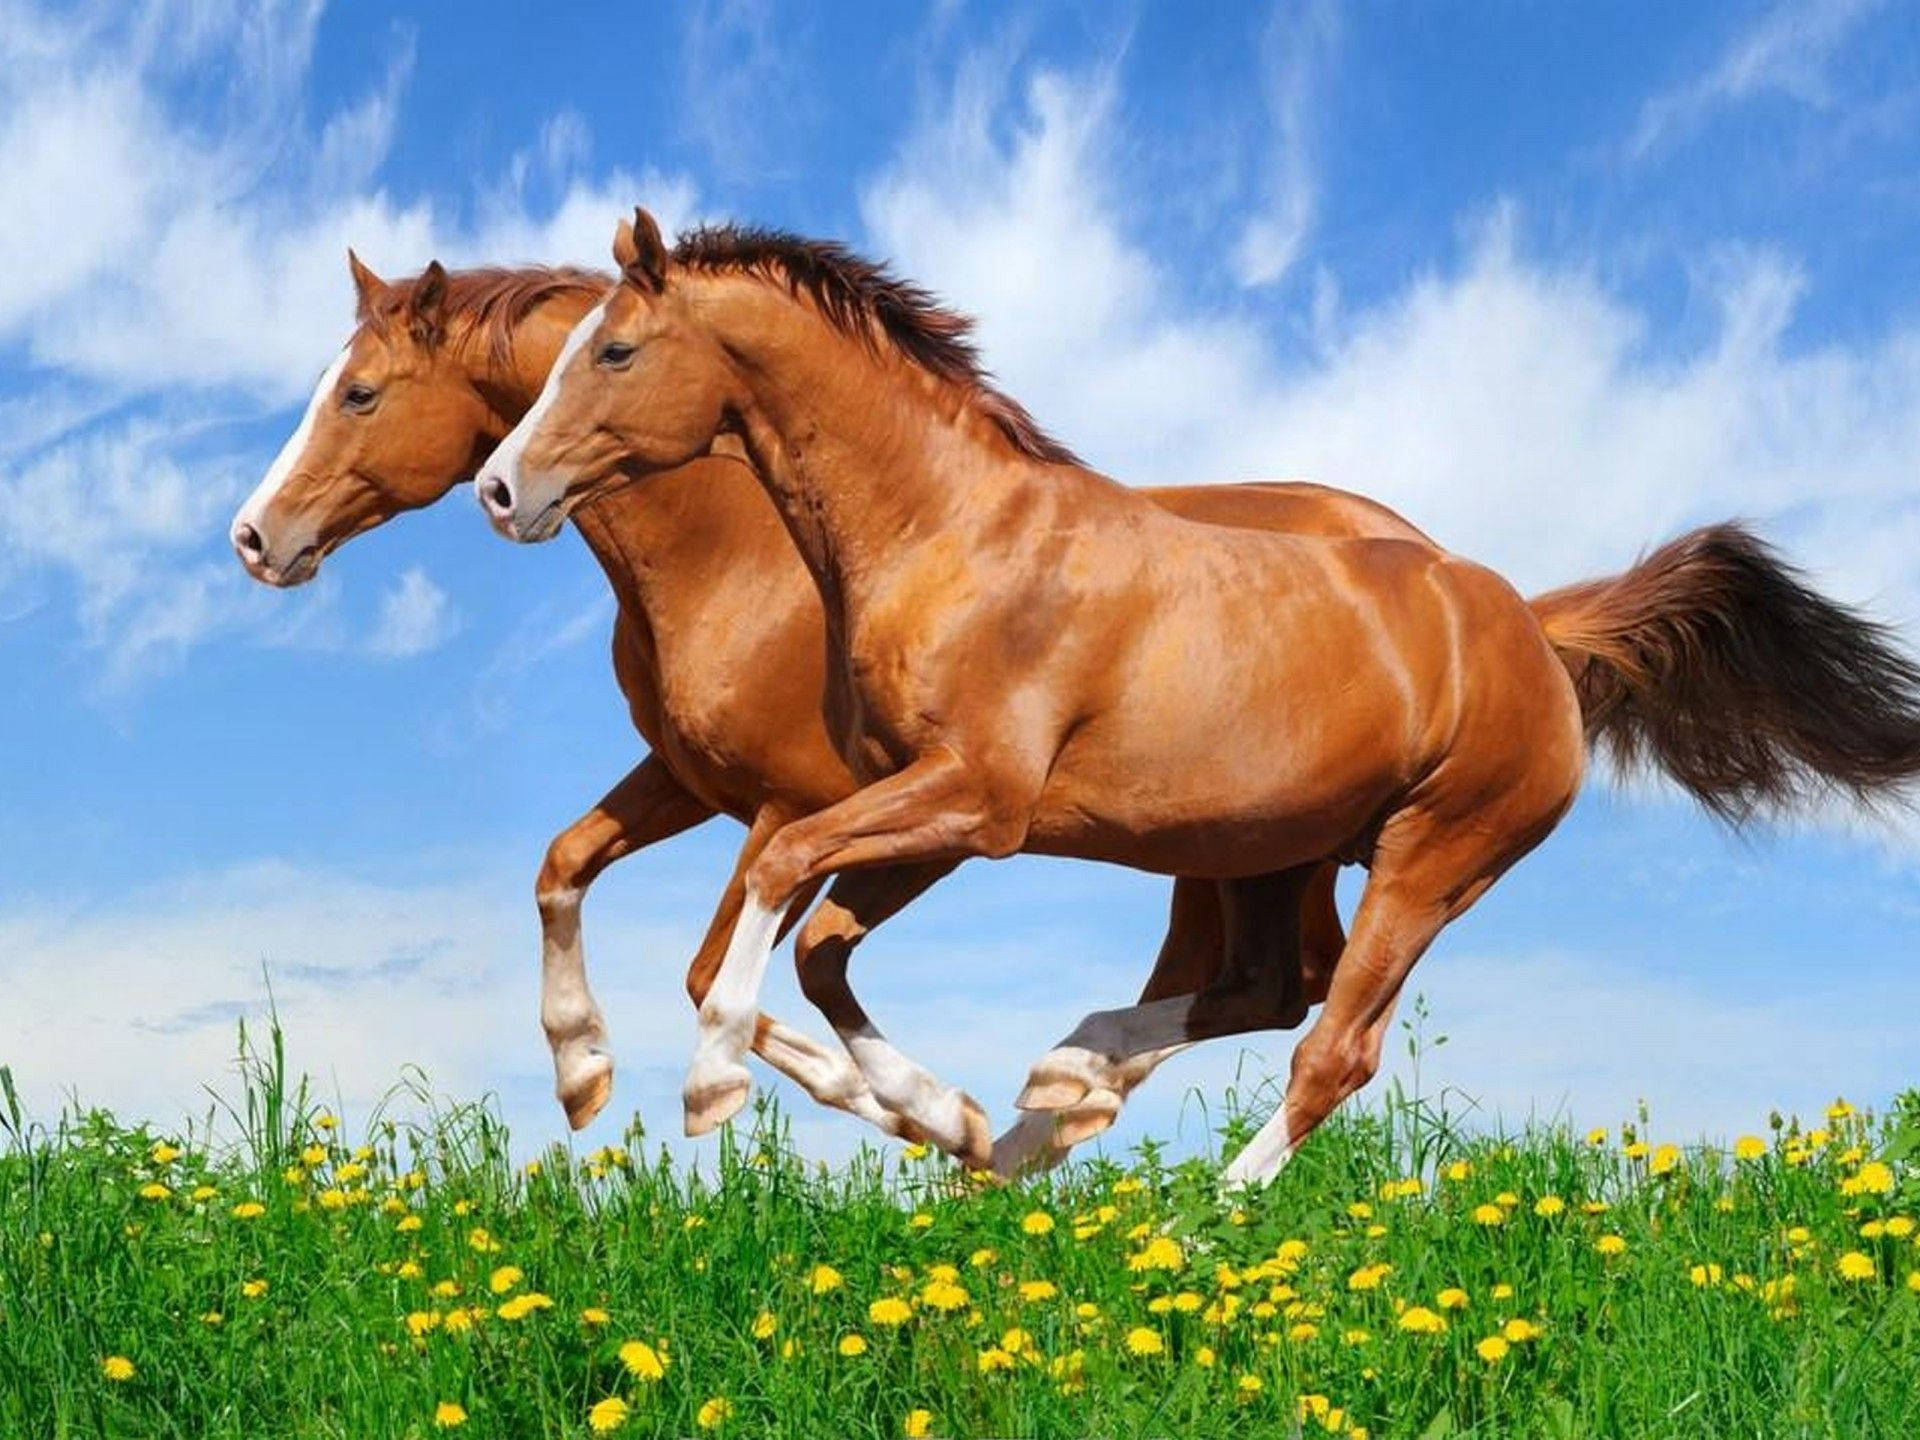 Cute Horses Running Together Wallpaper